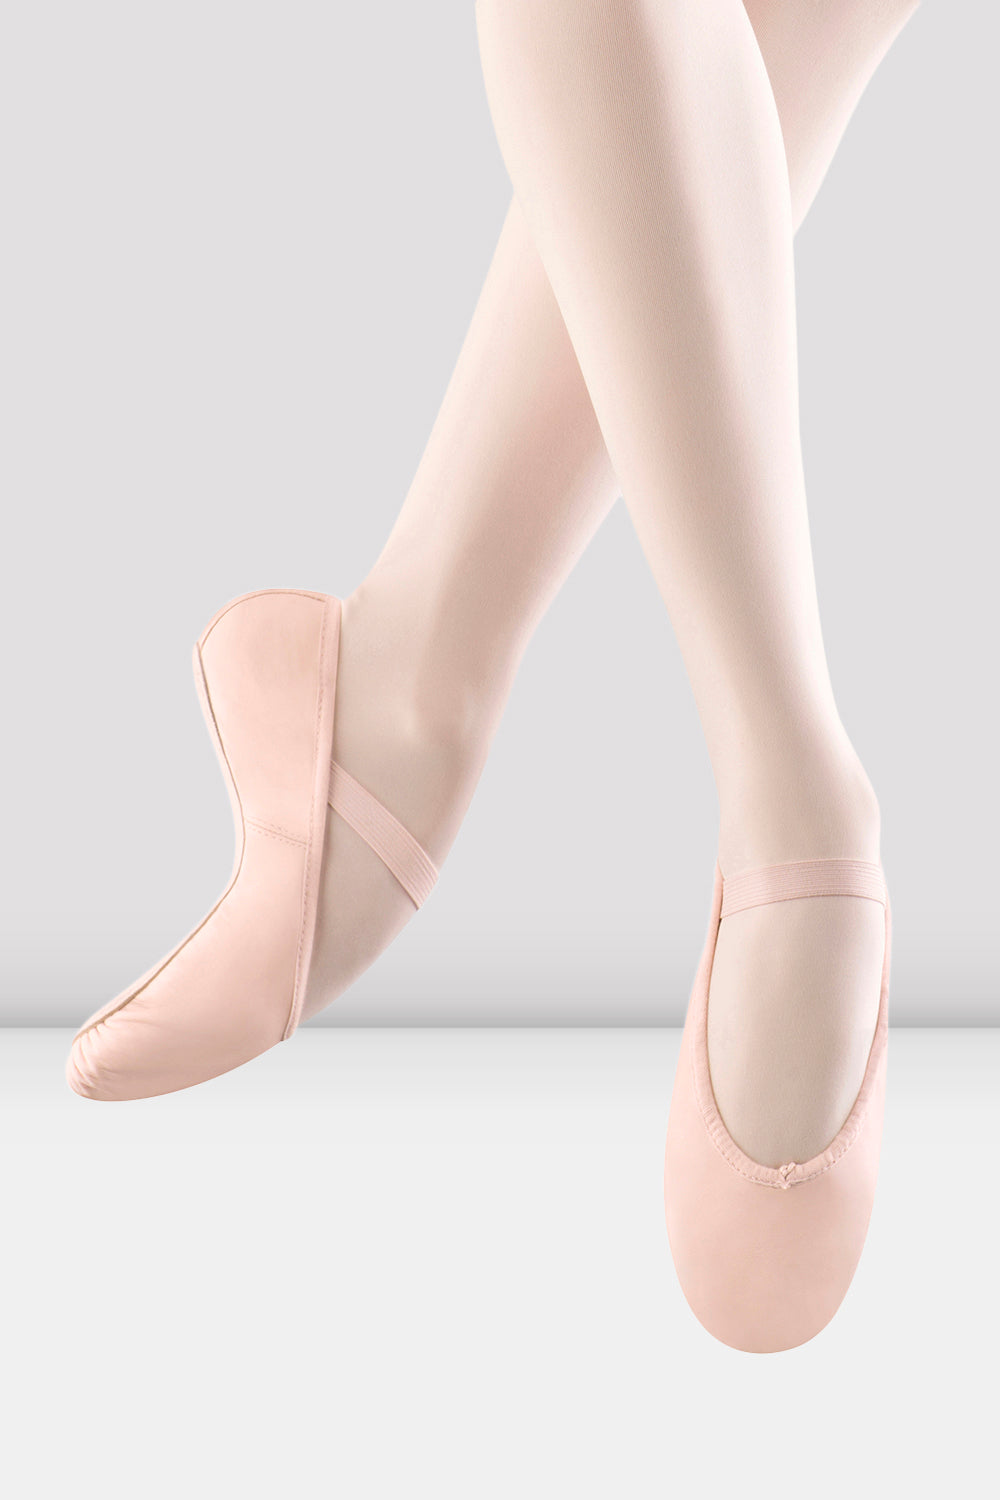 BLOCH Childrens Arise Leather Ballet Shoes, Theatrical Pink Leather